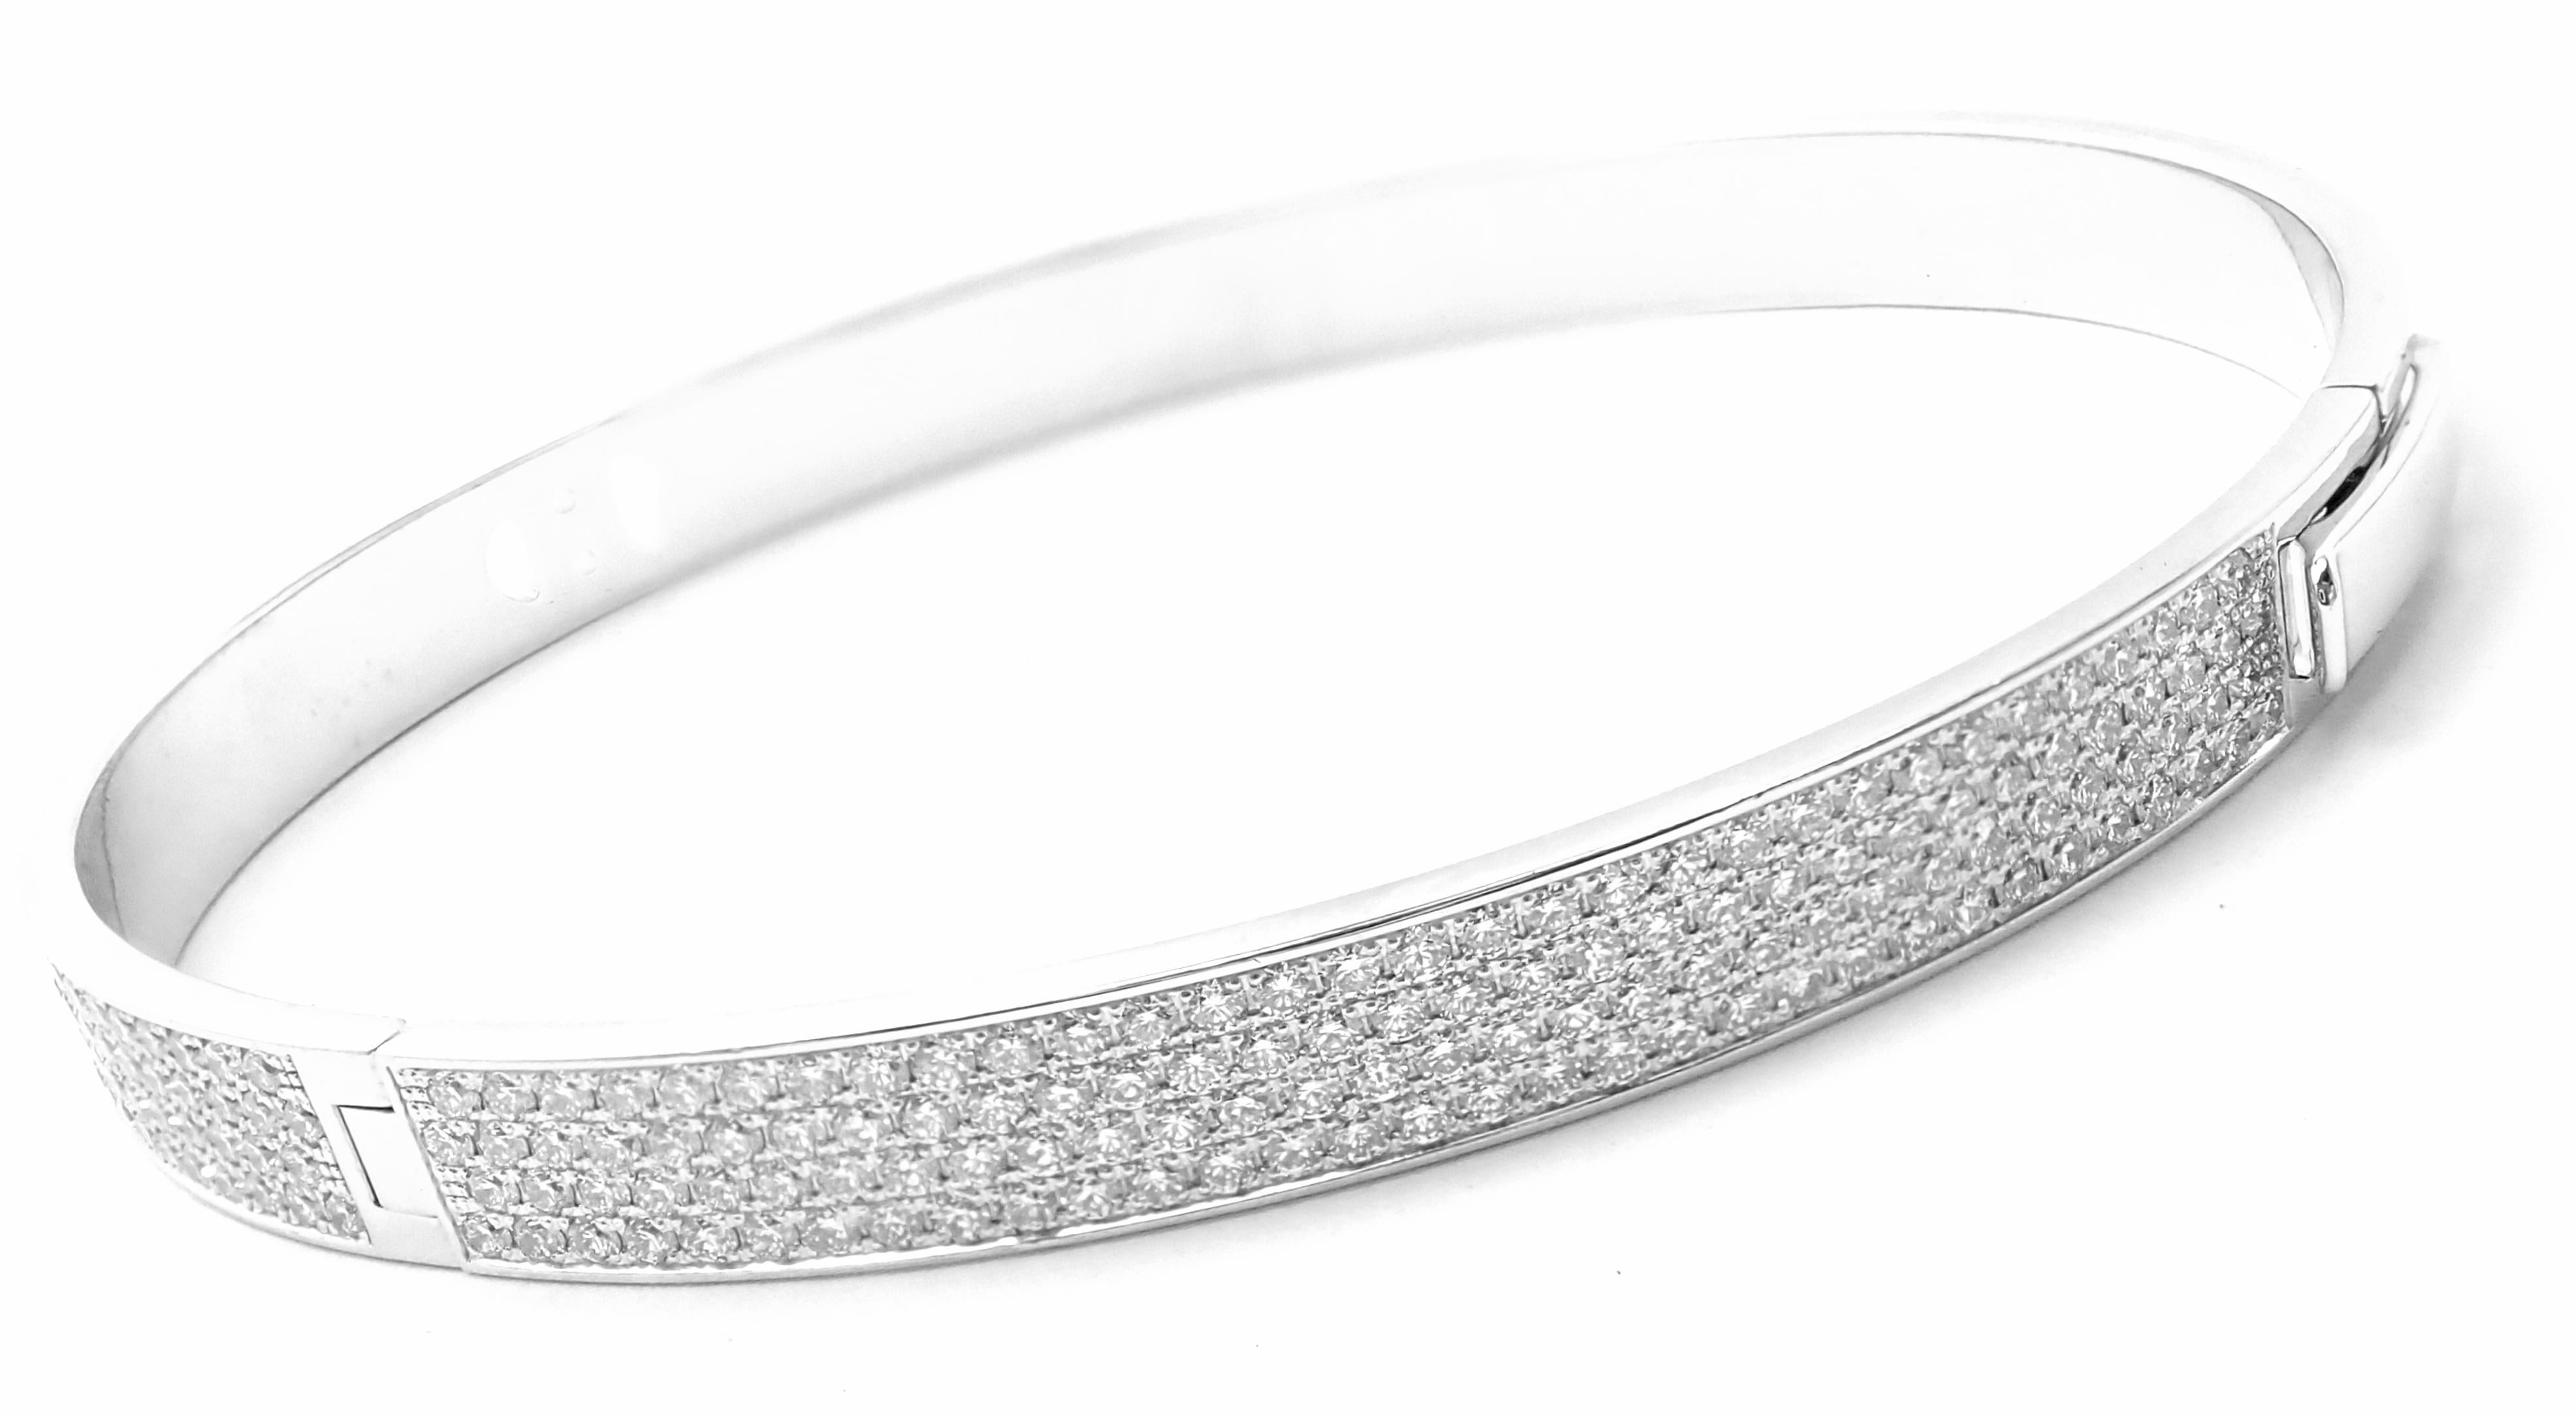 18k White Gold Diamond H D'Ancre Small Model Bangle Bracelet by Hermes. 
With 443 Round brilliant cut diamonds VVS1 clarity E color total weight approx. 3.09ct
Details: 
Length: Size: SH Length: 6.2